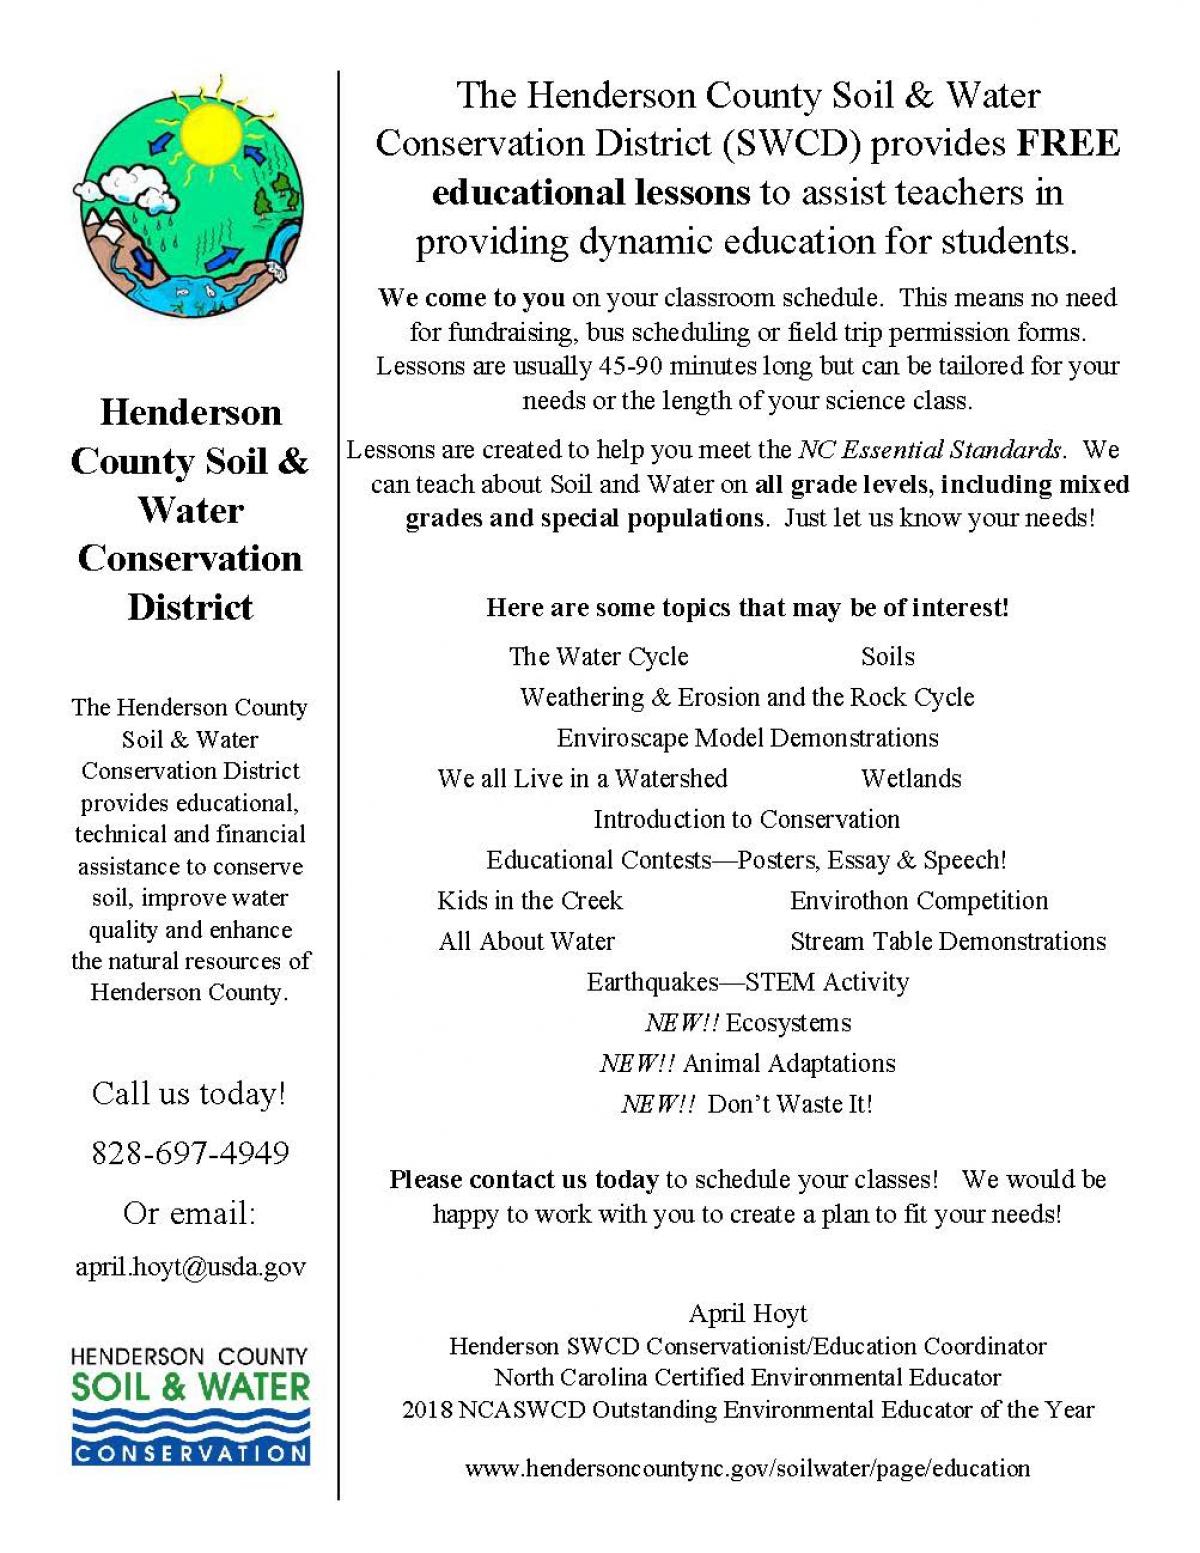 Henderson County Soil and Water Conservation offers a variety of FREE programs for students!  Please call us at 828-697-4949!